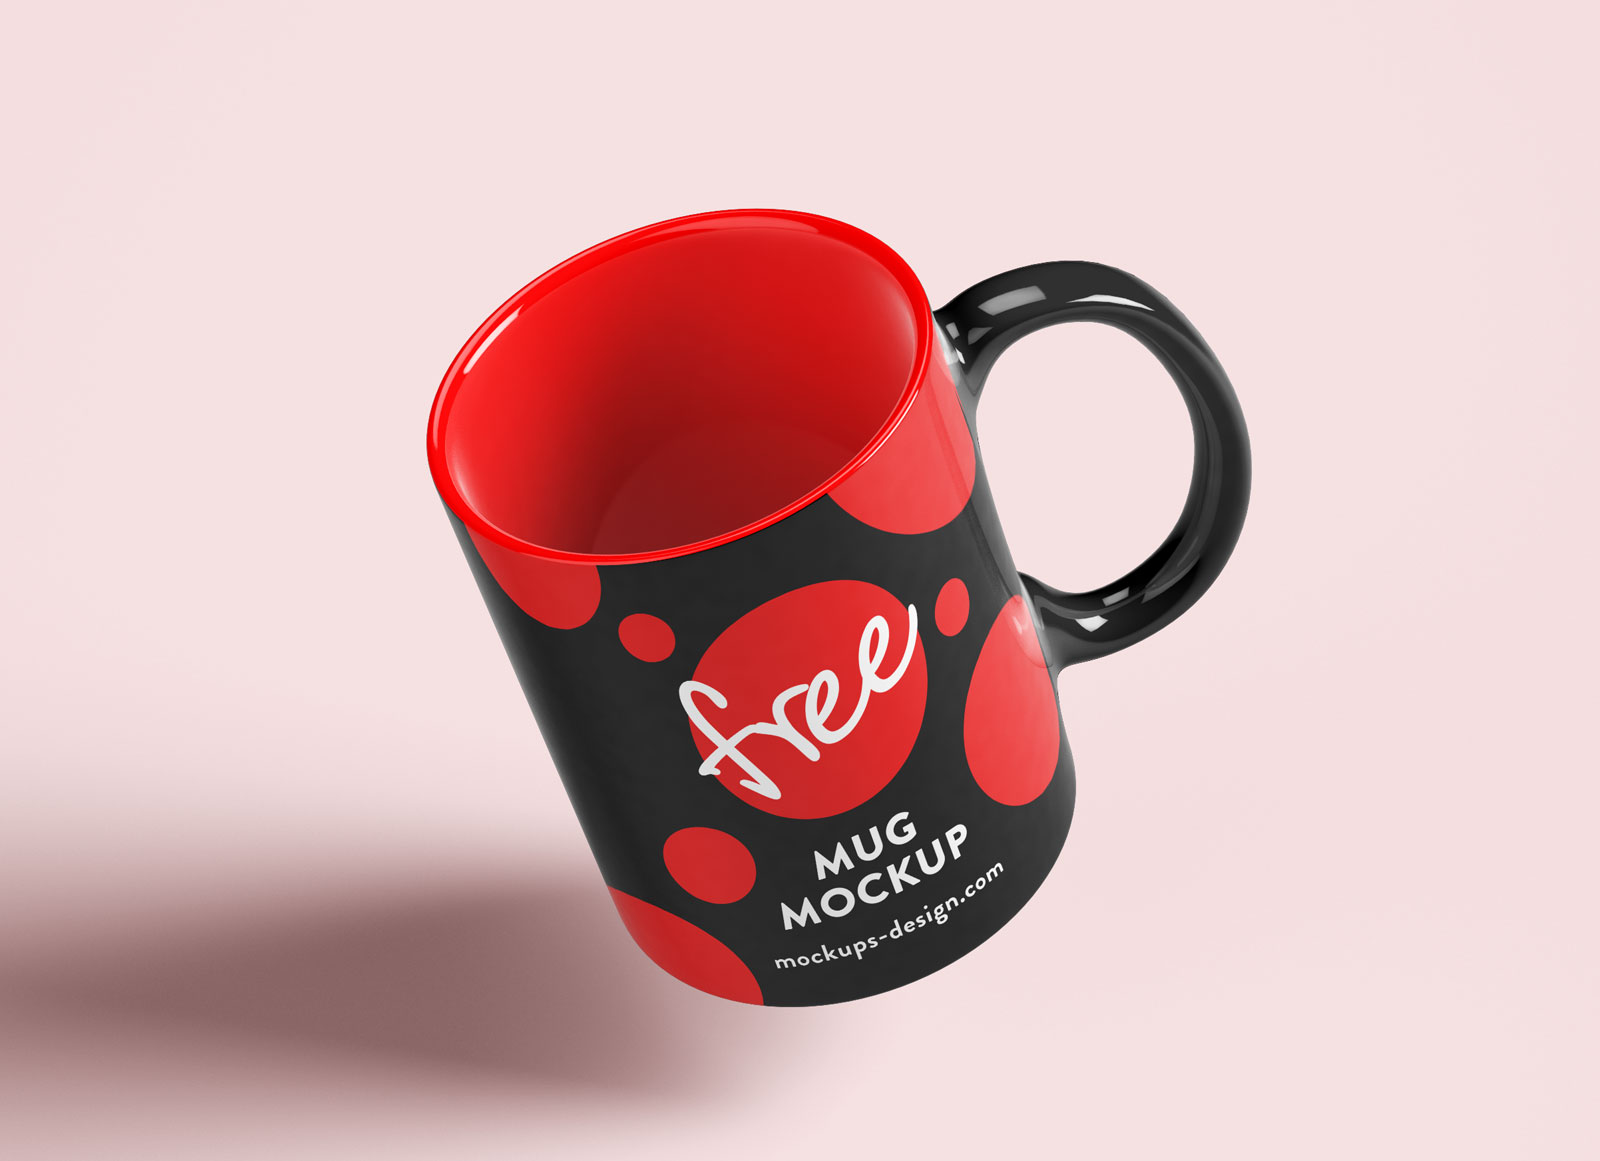 Download Free 5012+ Mockup Mug Cdr Yellowimages Mockups for Cricut, Silhouette and Other Machine